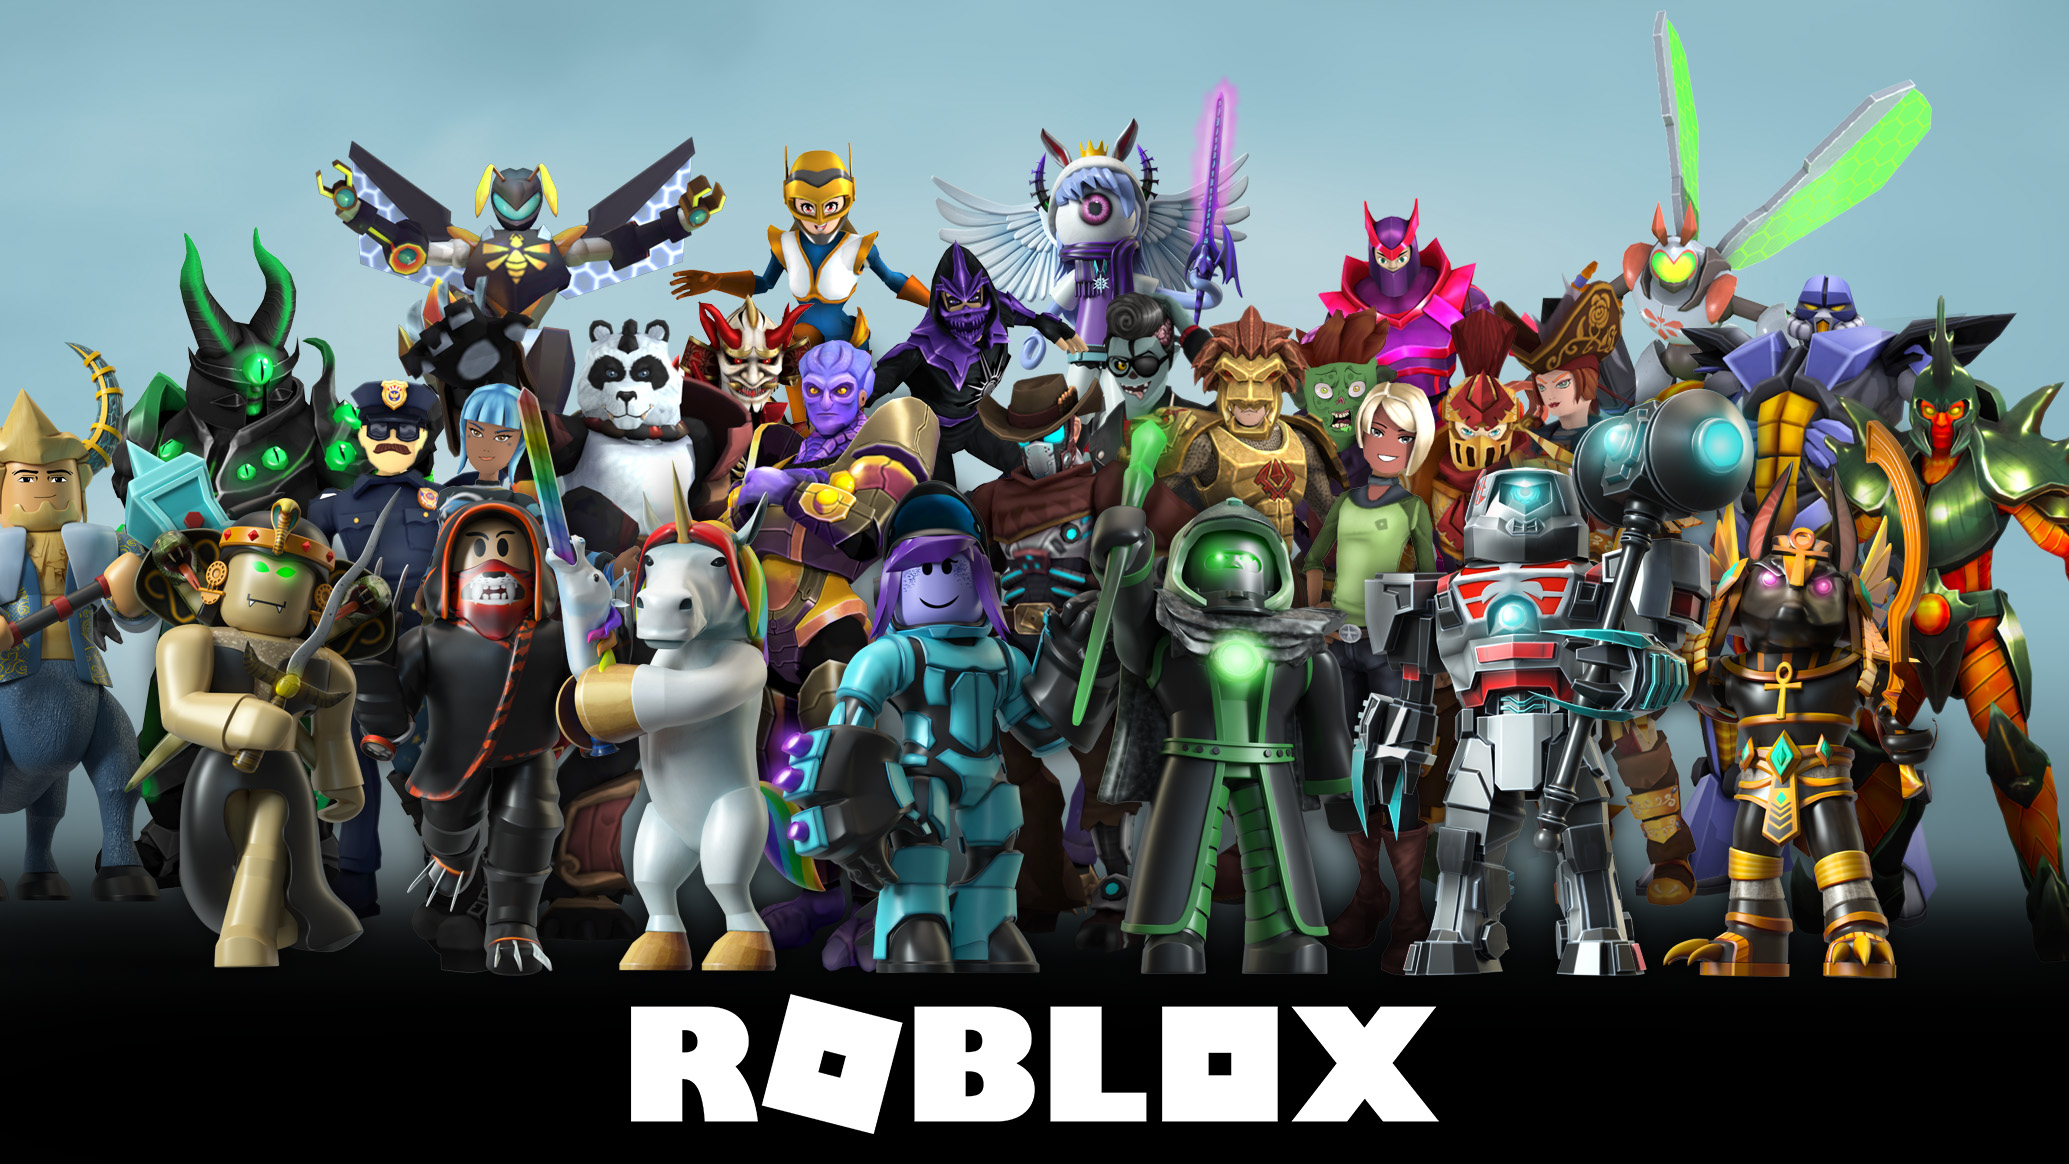 Toy Code Redemption Page Roblox